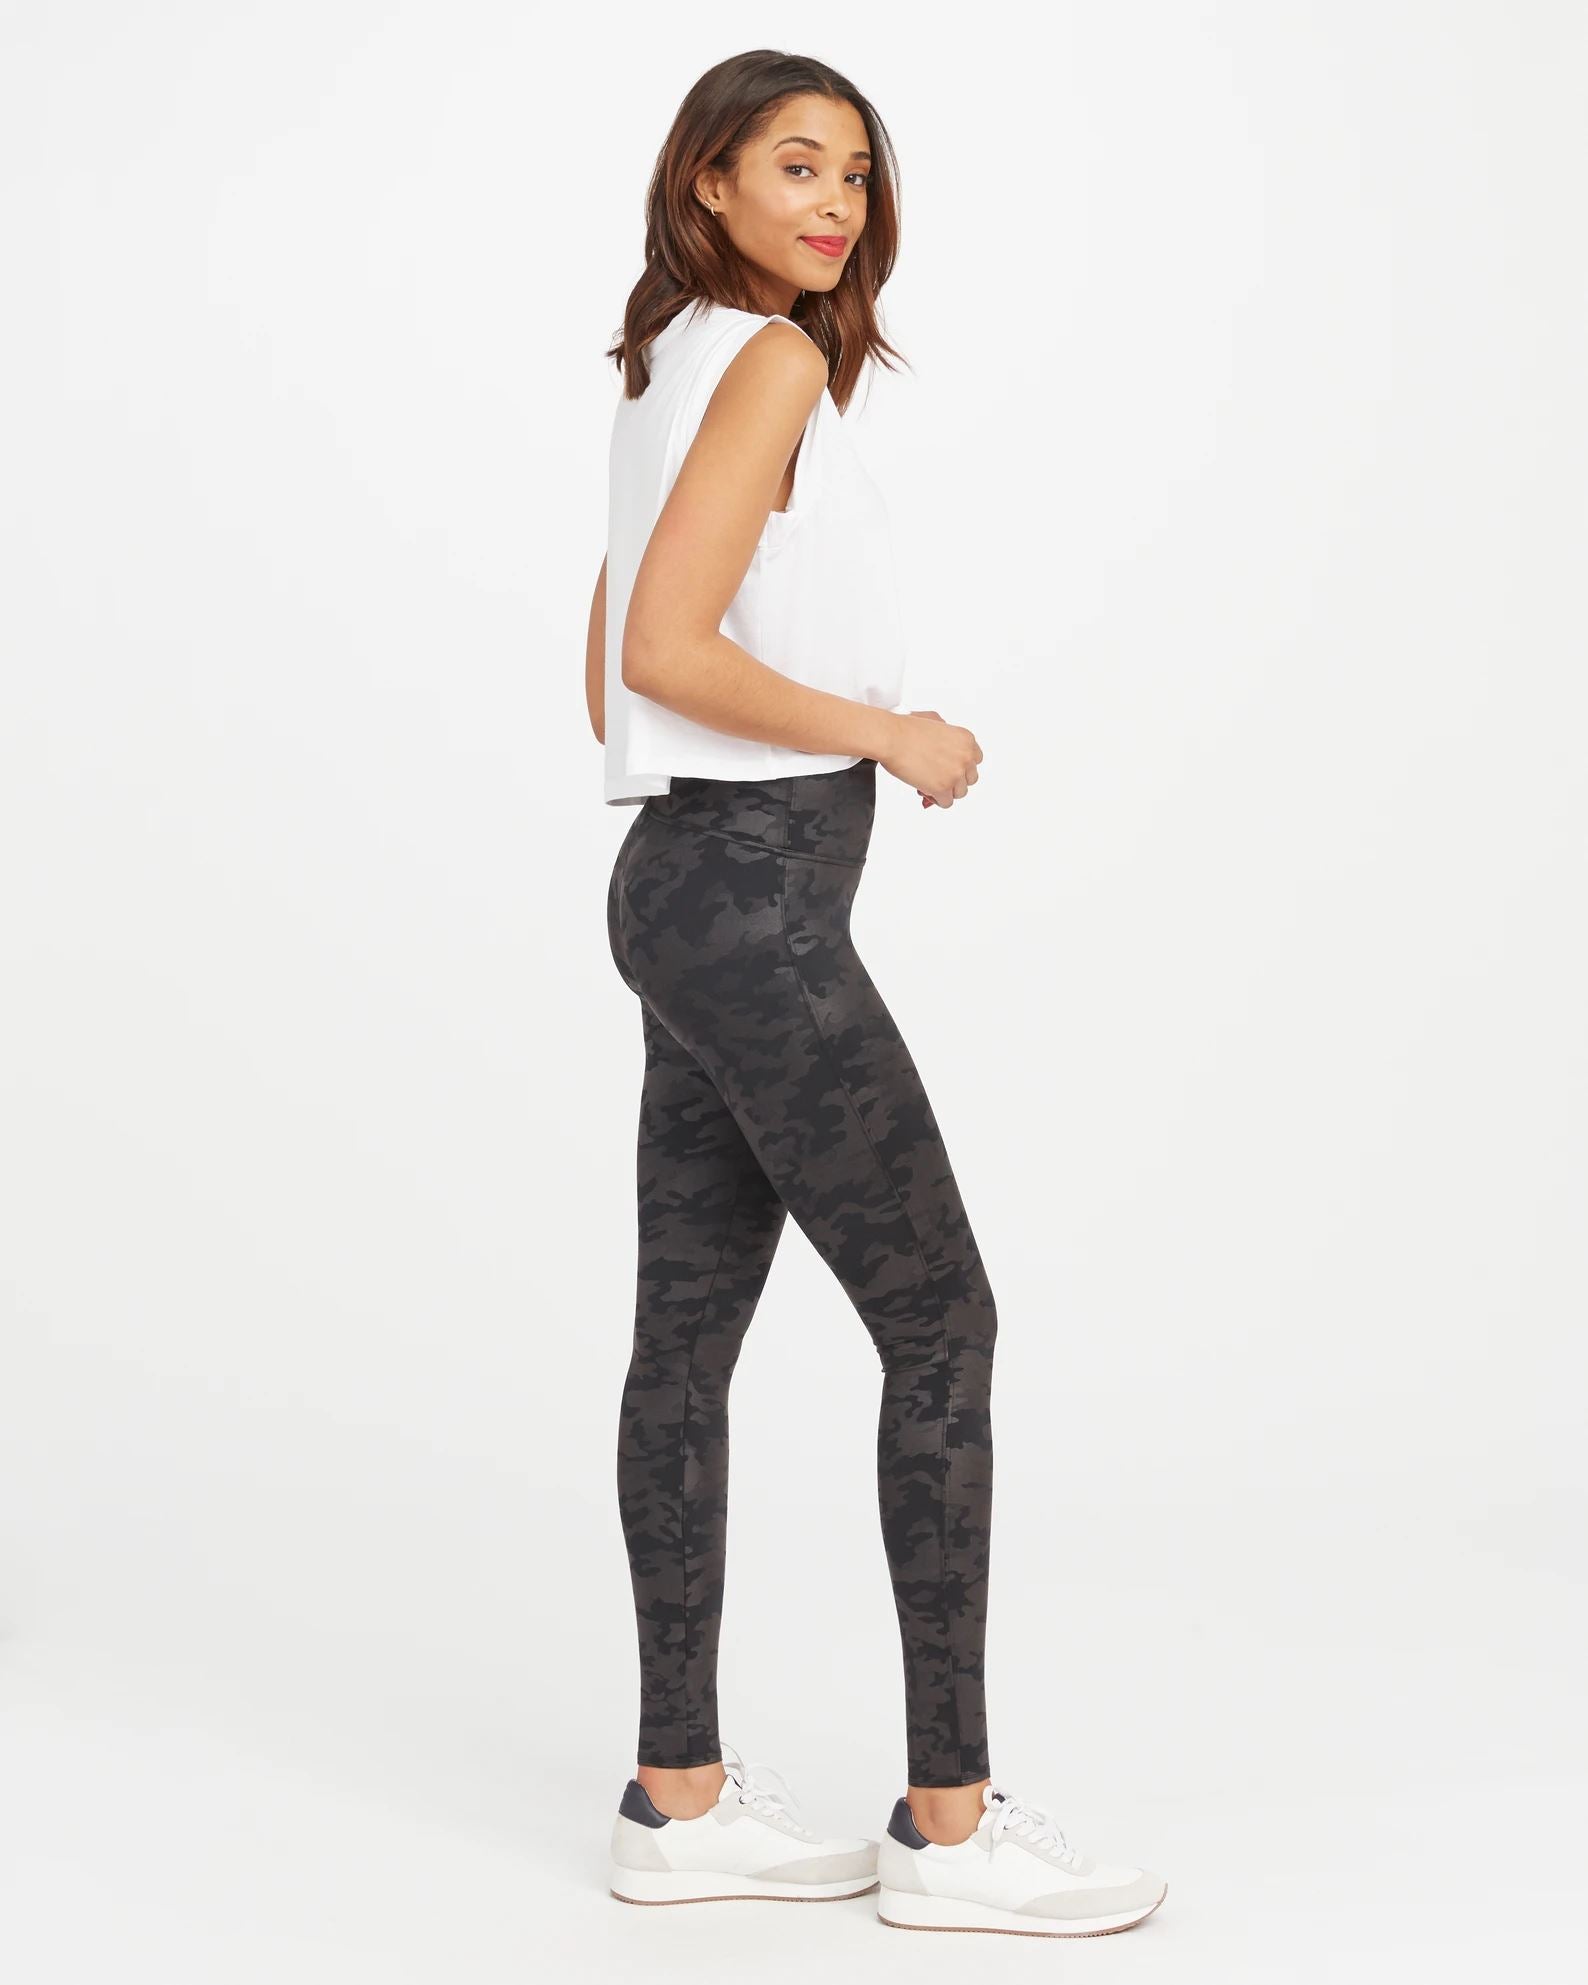 Spanx Faux Leather Black Camo Legging – Styleartist